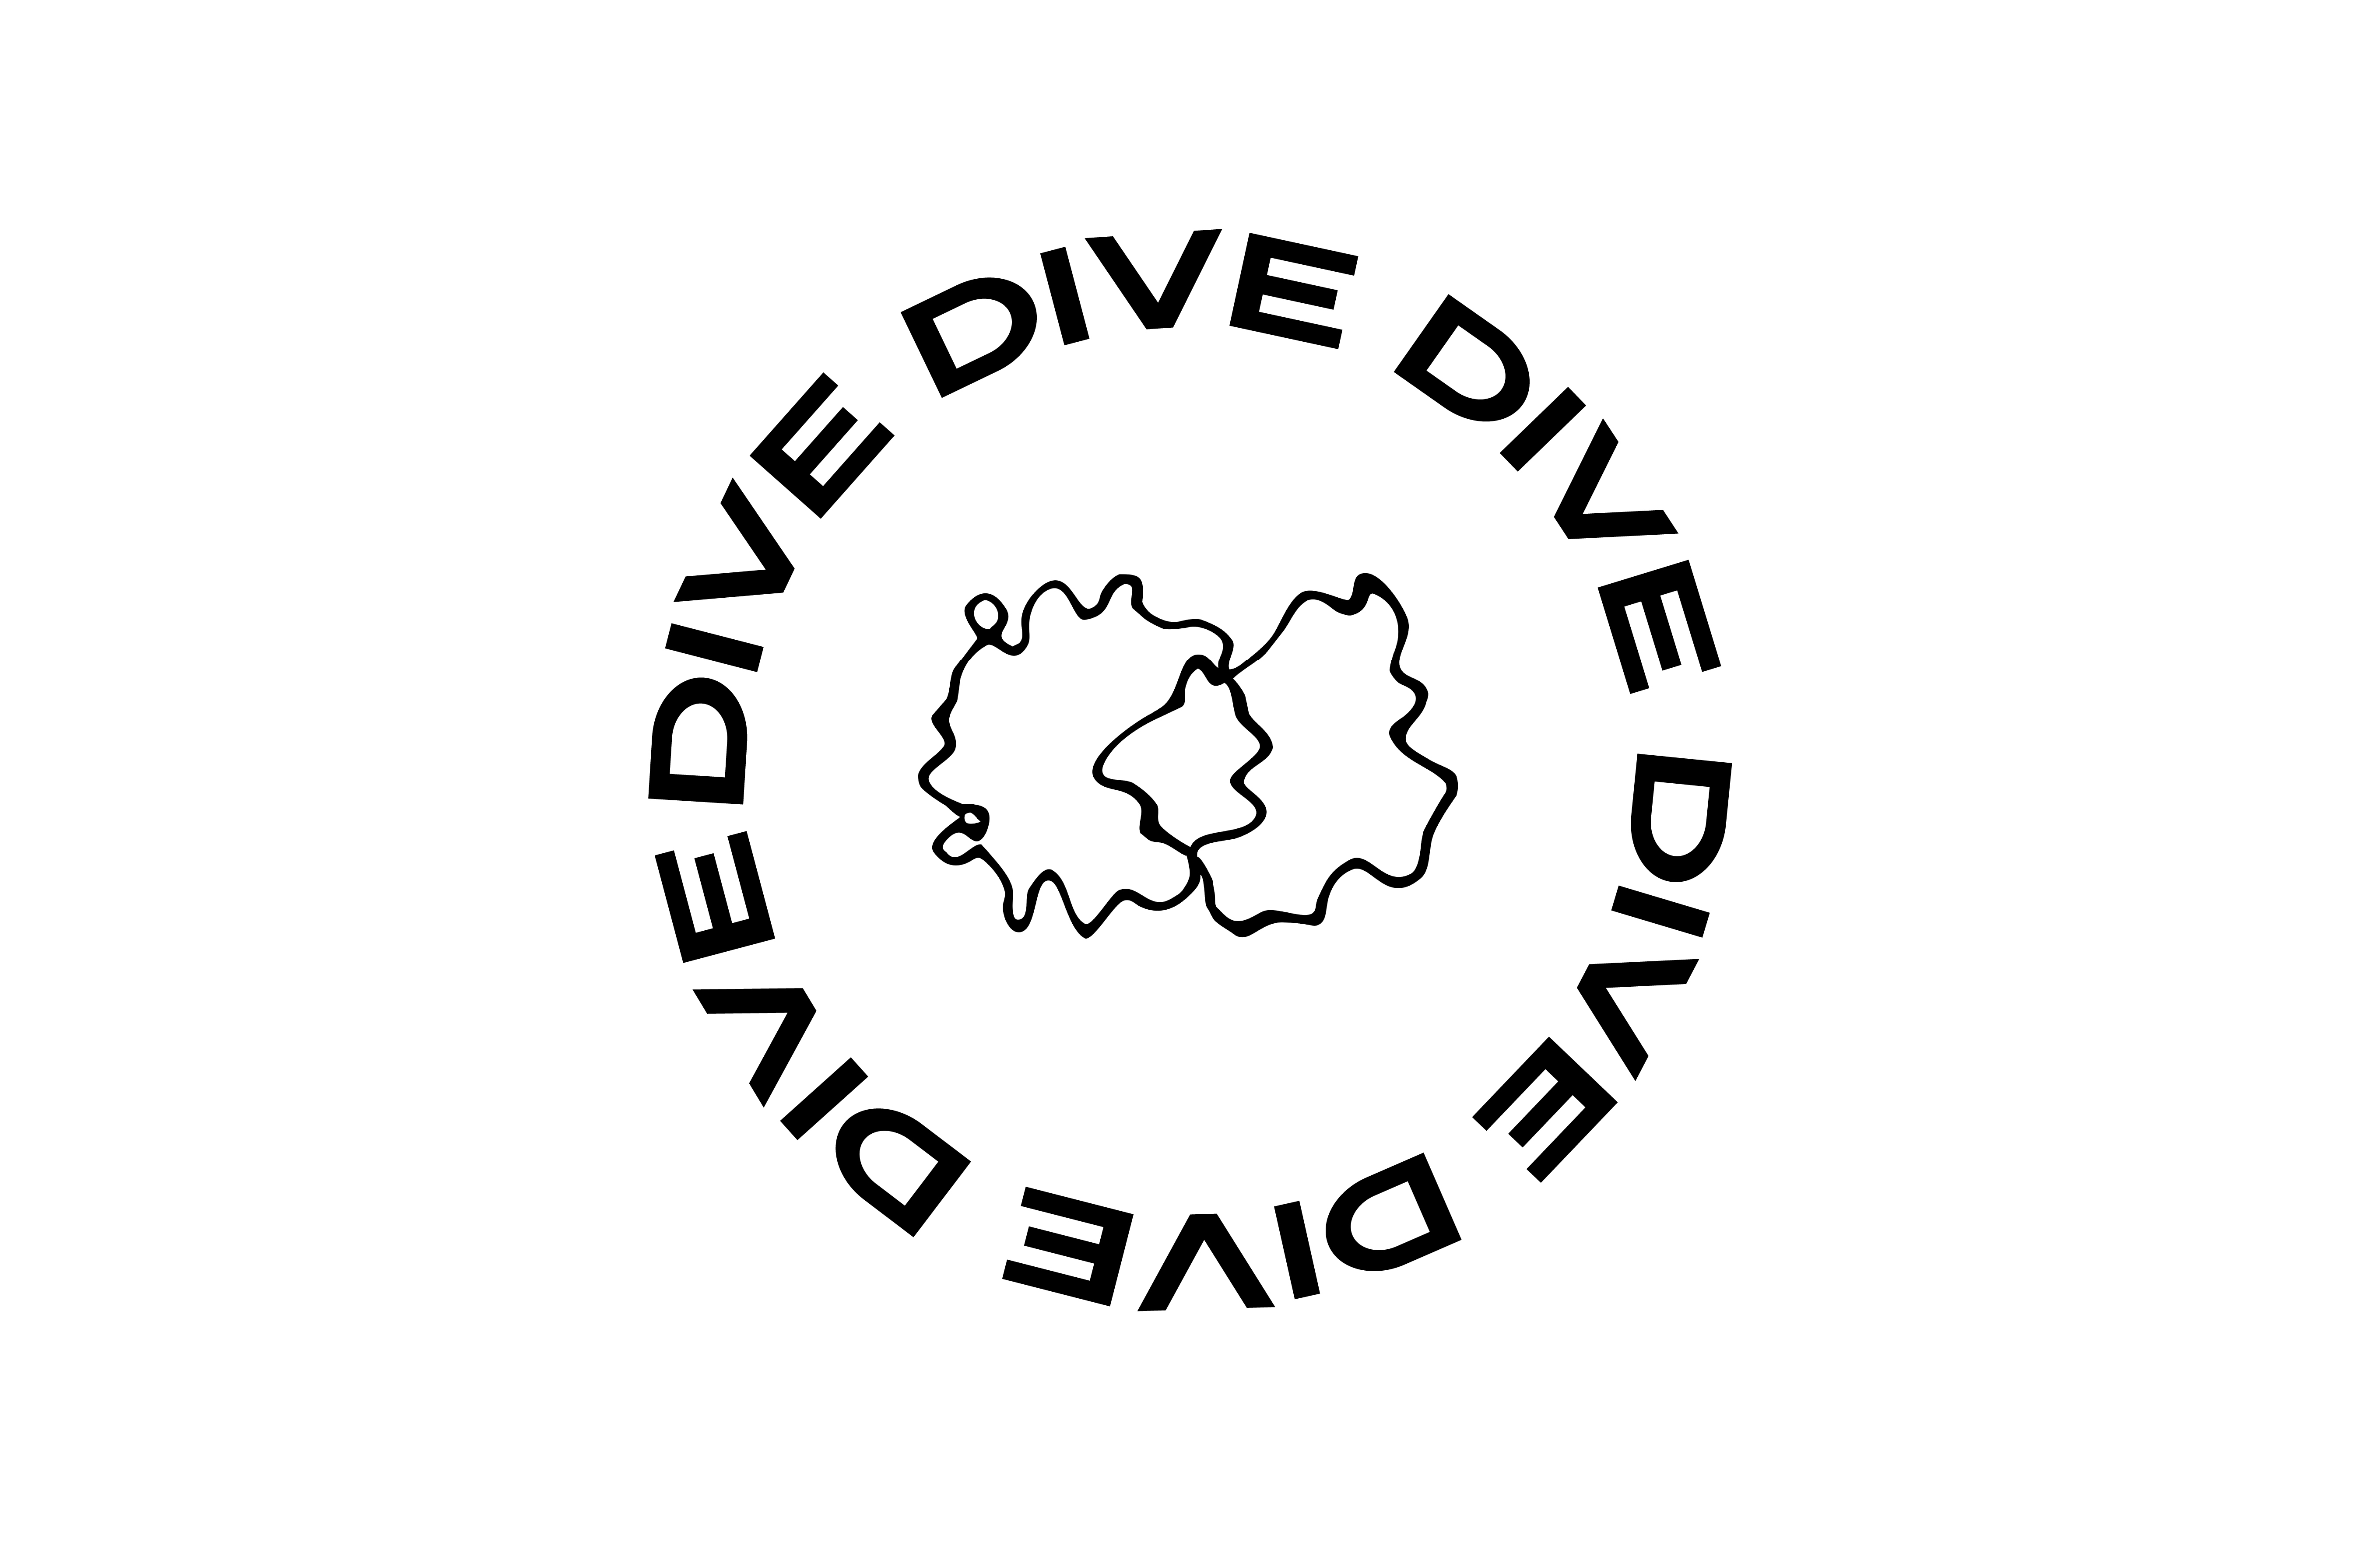 The text DIVE in a circle on white background